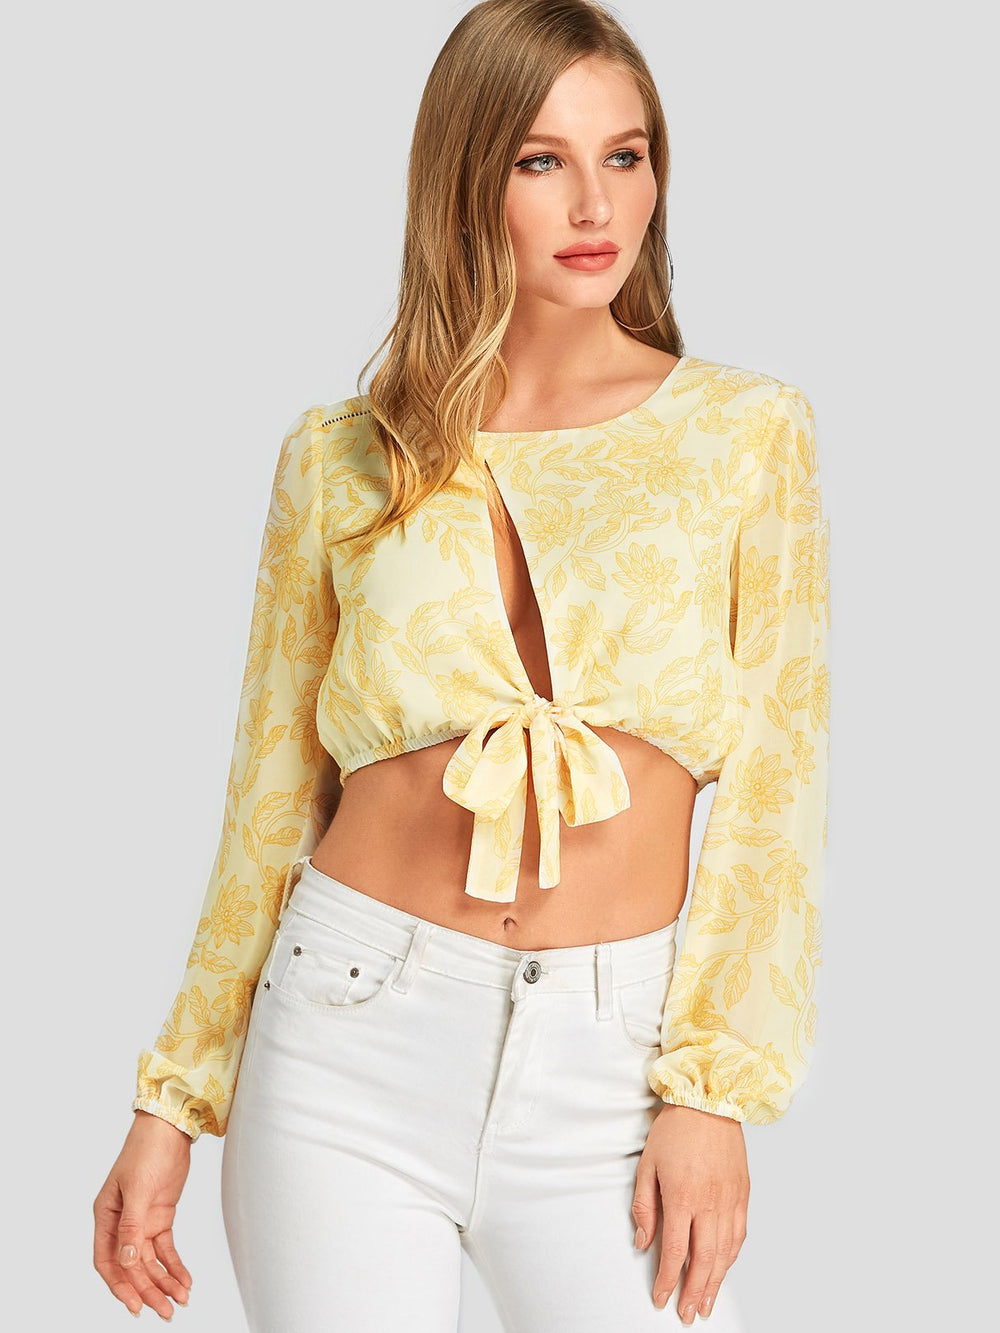 Round Neck Floral Print Cut Out Yellow Crop Top